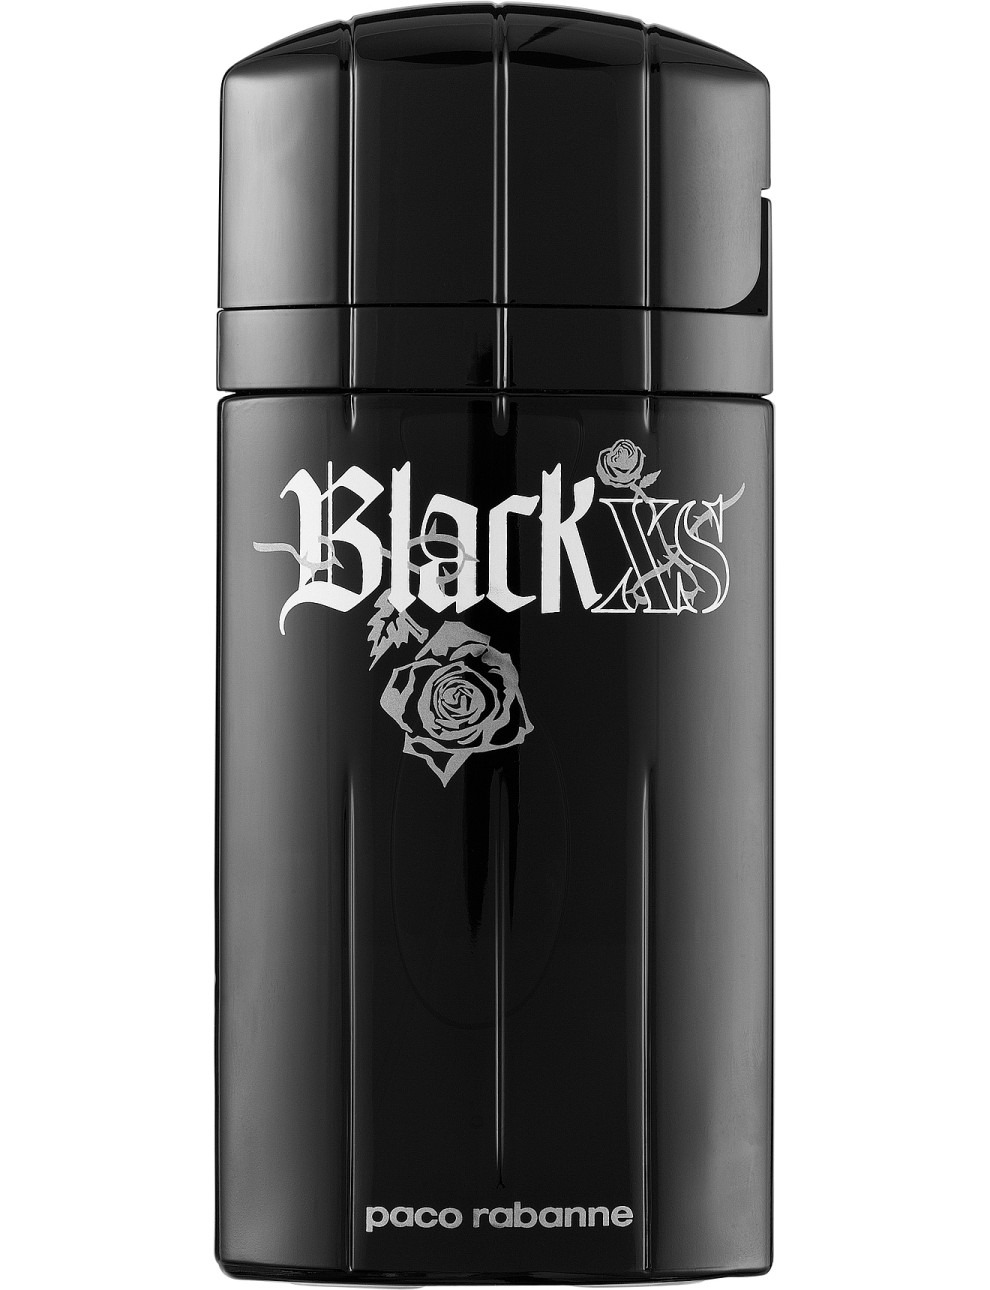 Paco Rabanne Black Xs Unboxed for Men 100ml EDT - faureal